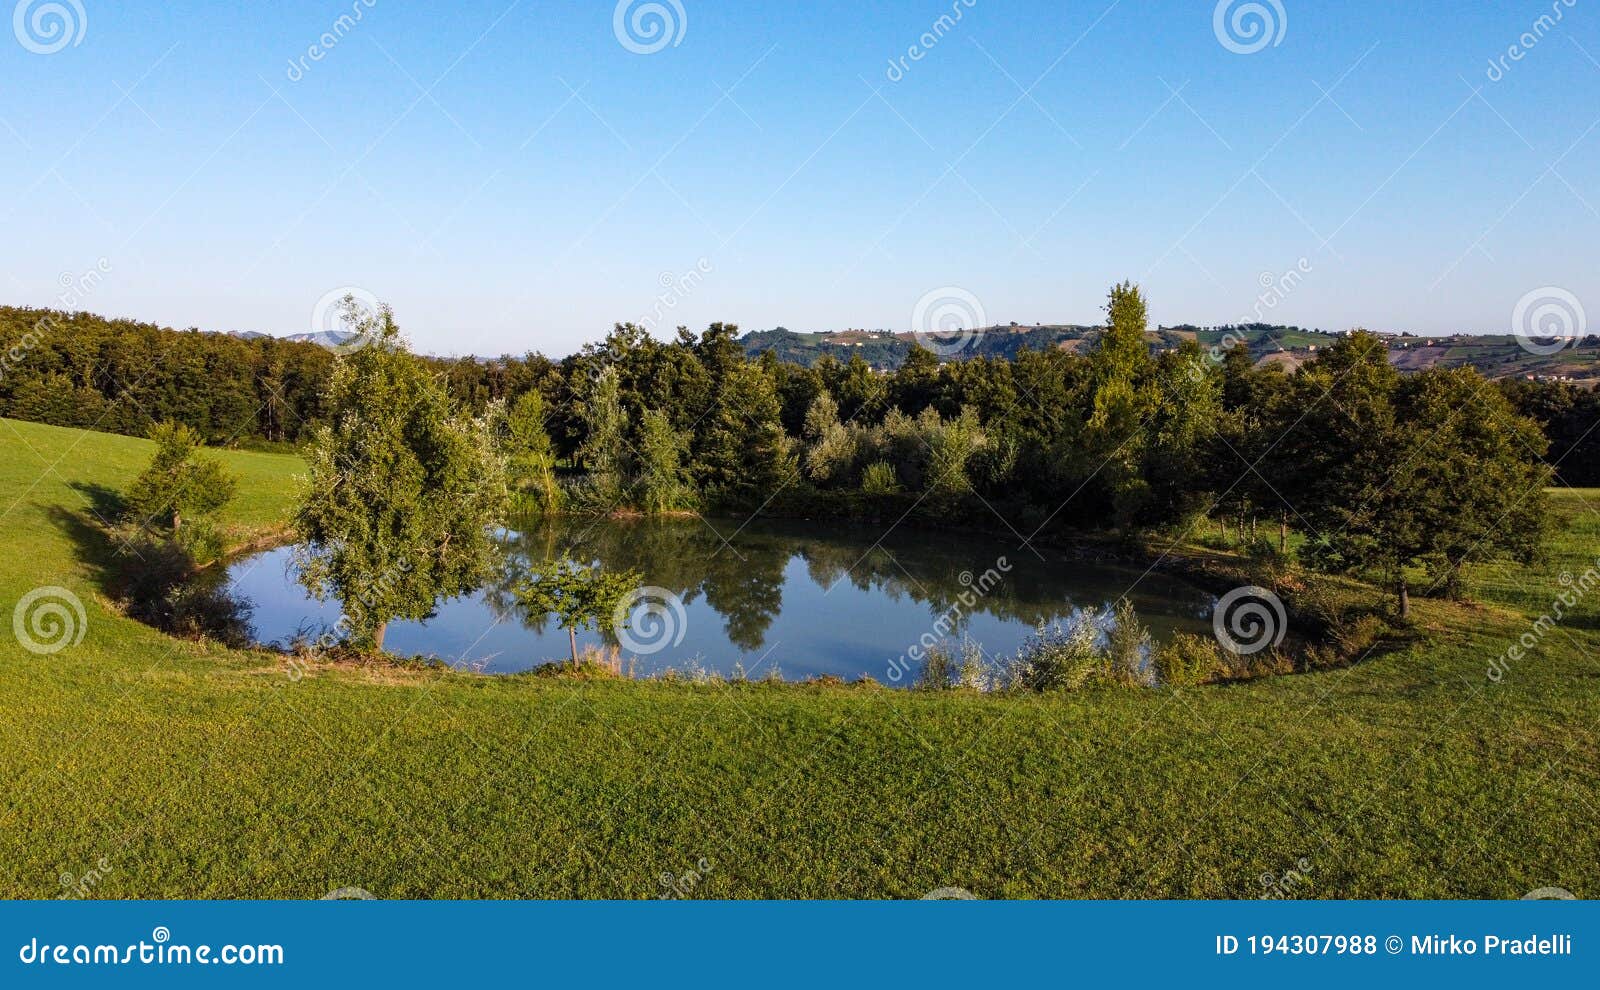 aerial view of a little lake and trees surrounding, in italian appennini hills